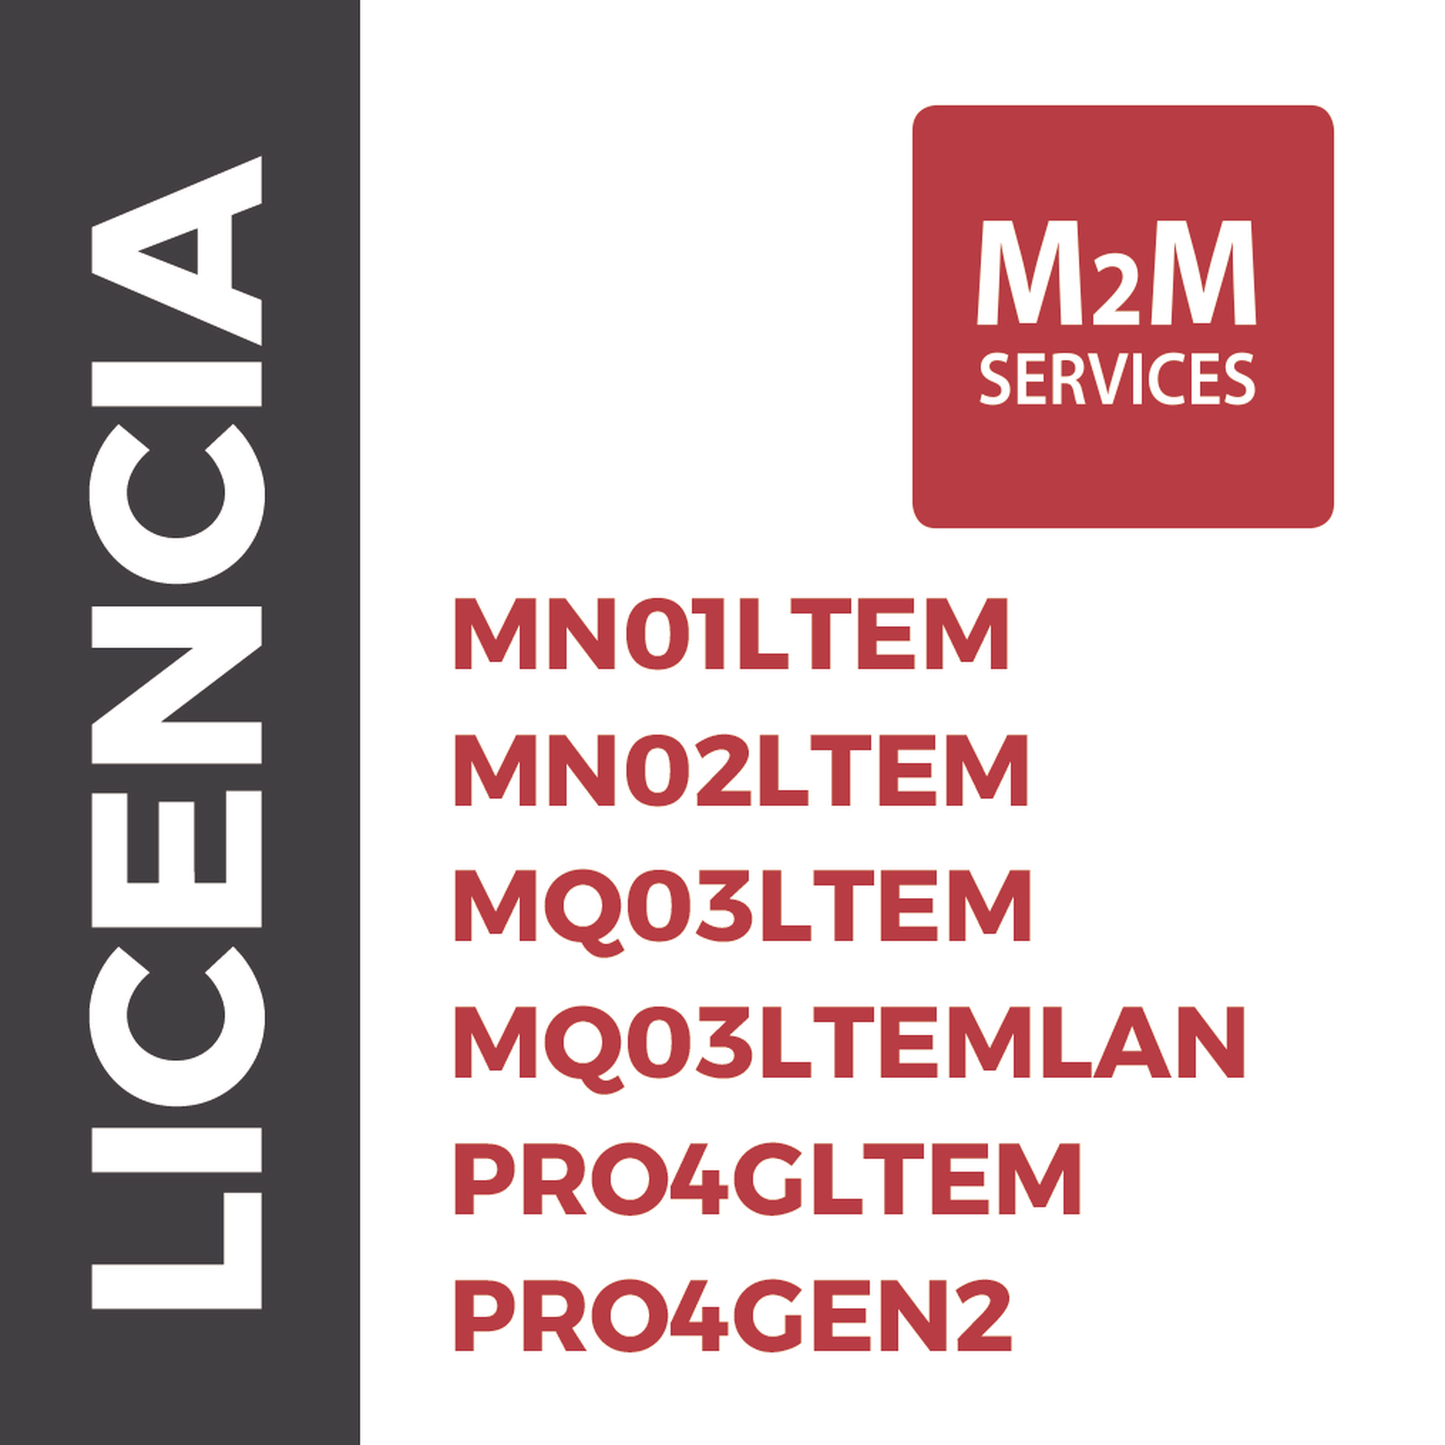 MN02LTEM / PRO4GLTEM / PRO4GEN2 / MQ03LTEM One-Year Monitoring Service with unlimited events.